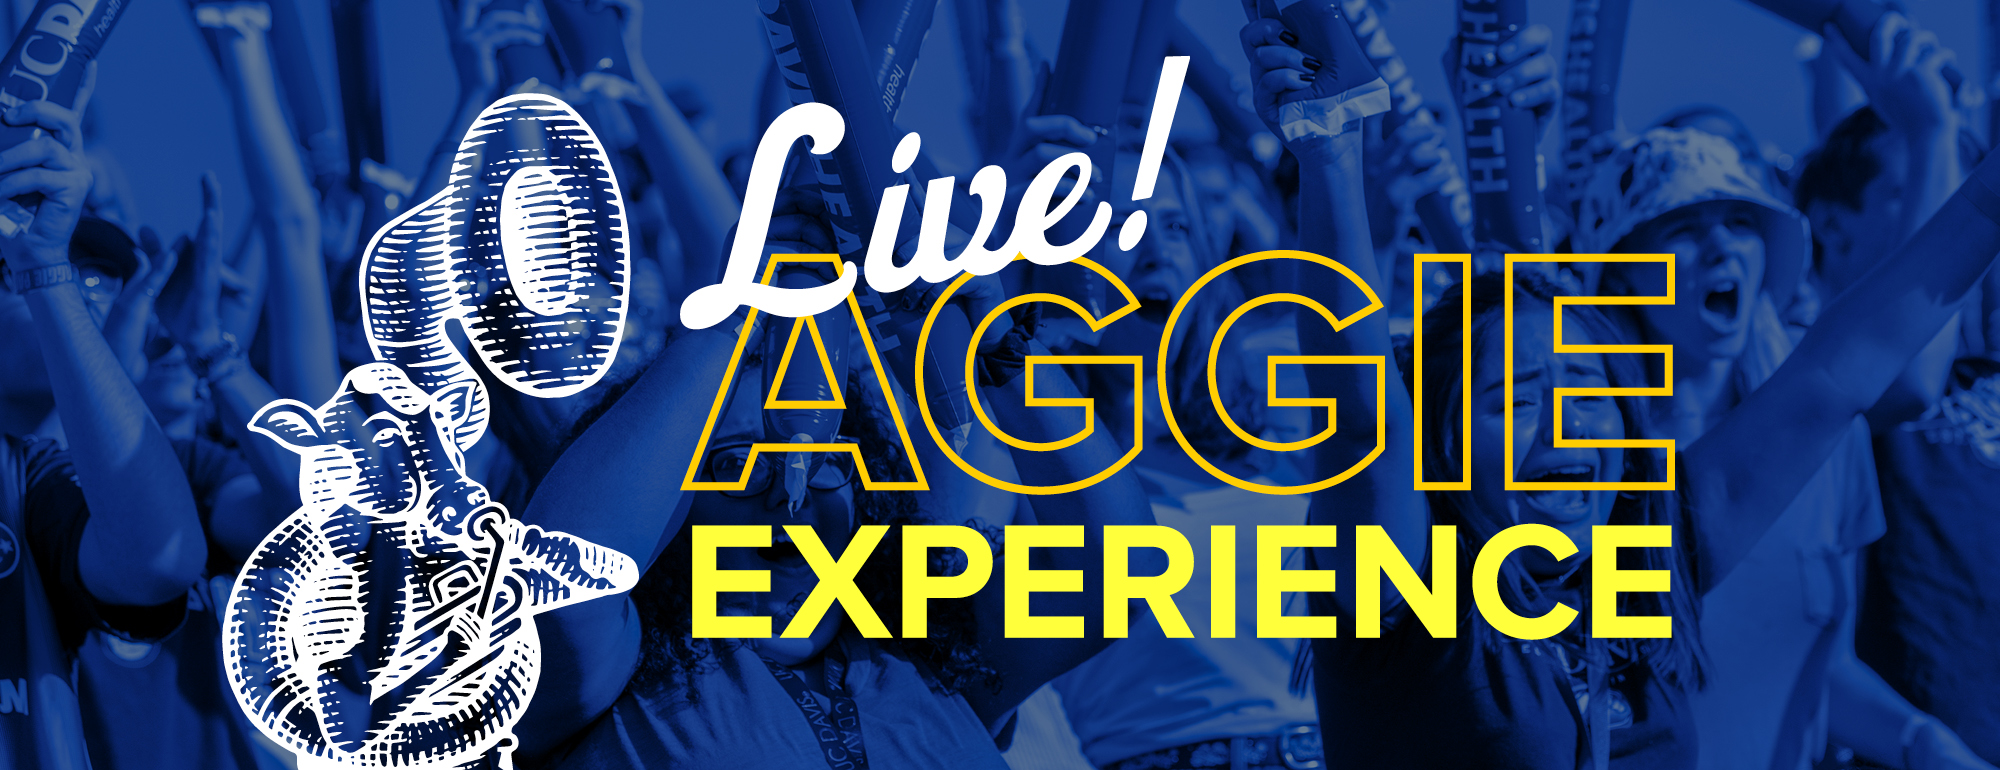 Aggie Experience Live